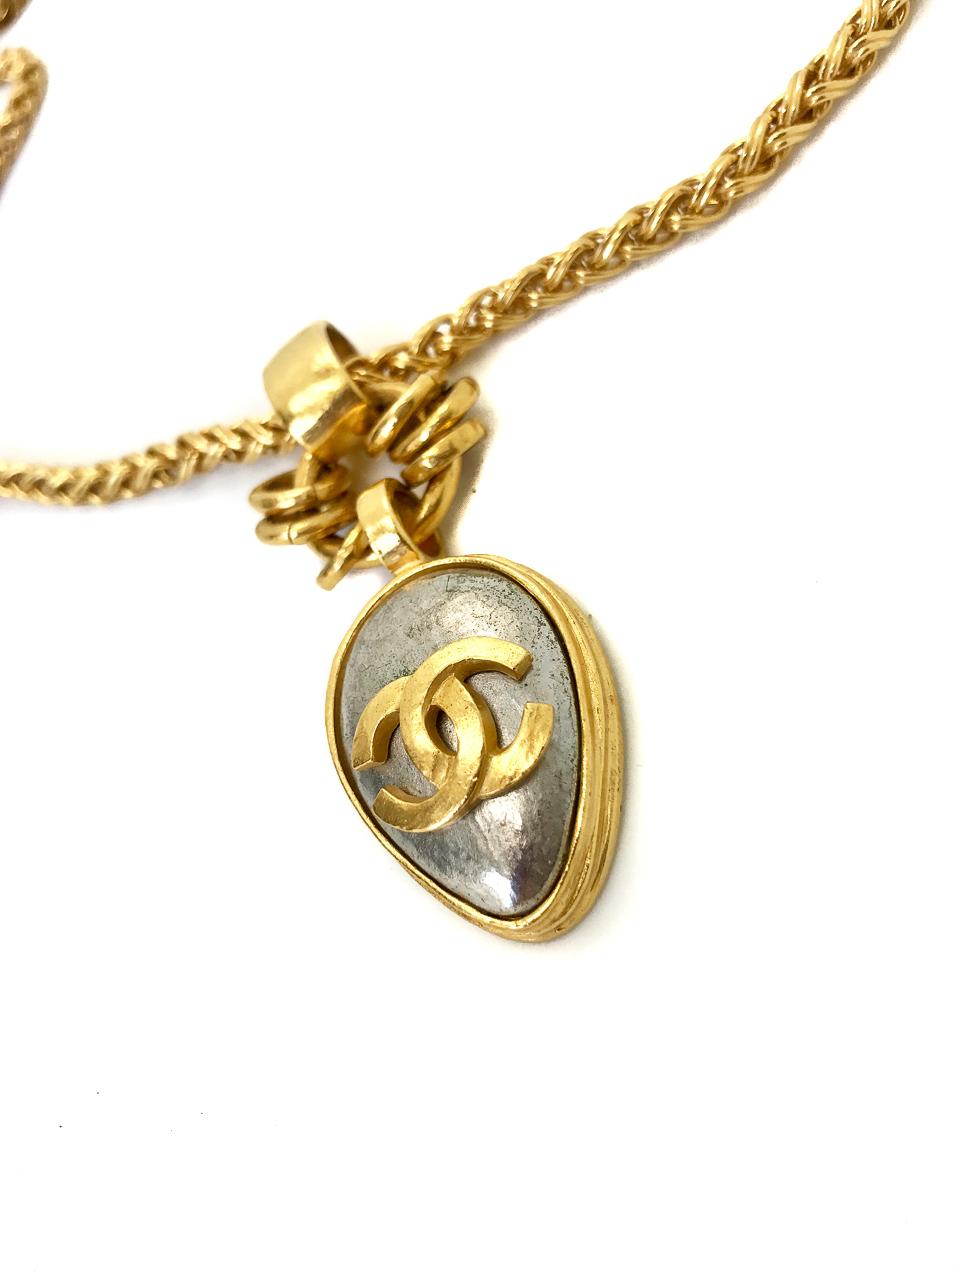 Chanel 1990s (1997 A) Gold Plated Pendant Necklace on chunky gold plated chain.  The iconic CC logo is emblazoned in gold plate on the silver coloured pendant. 

Designed for the 1997 Autumn Winter Collection, this piece is so evocative of Chanel's